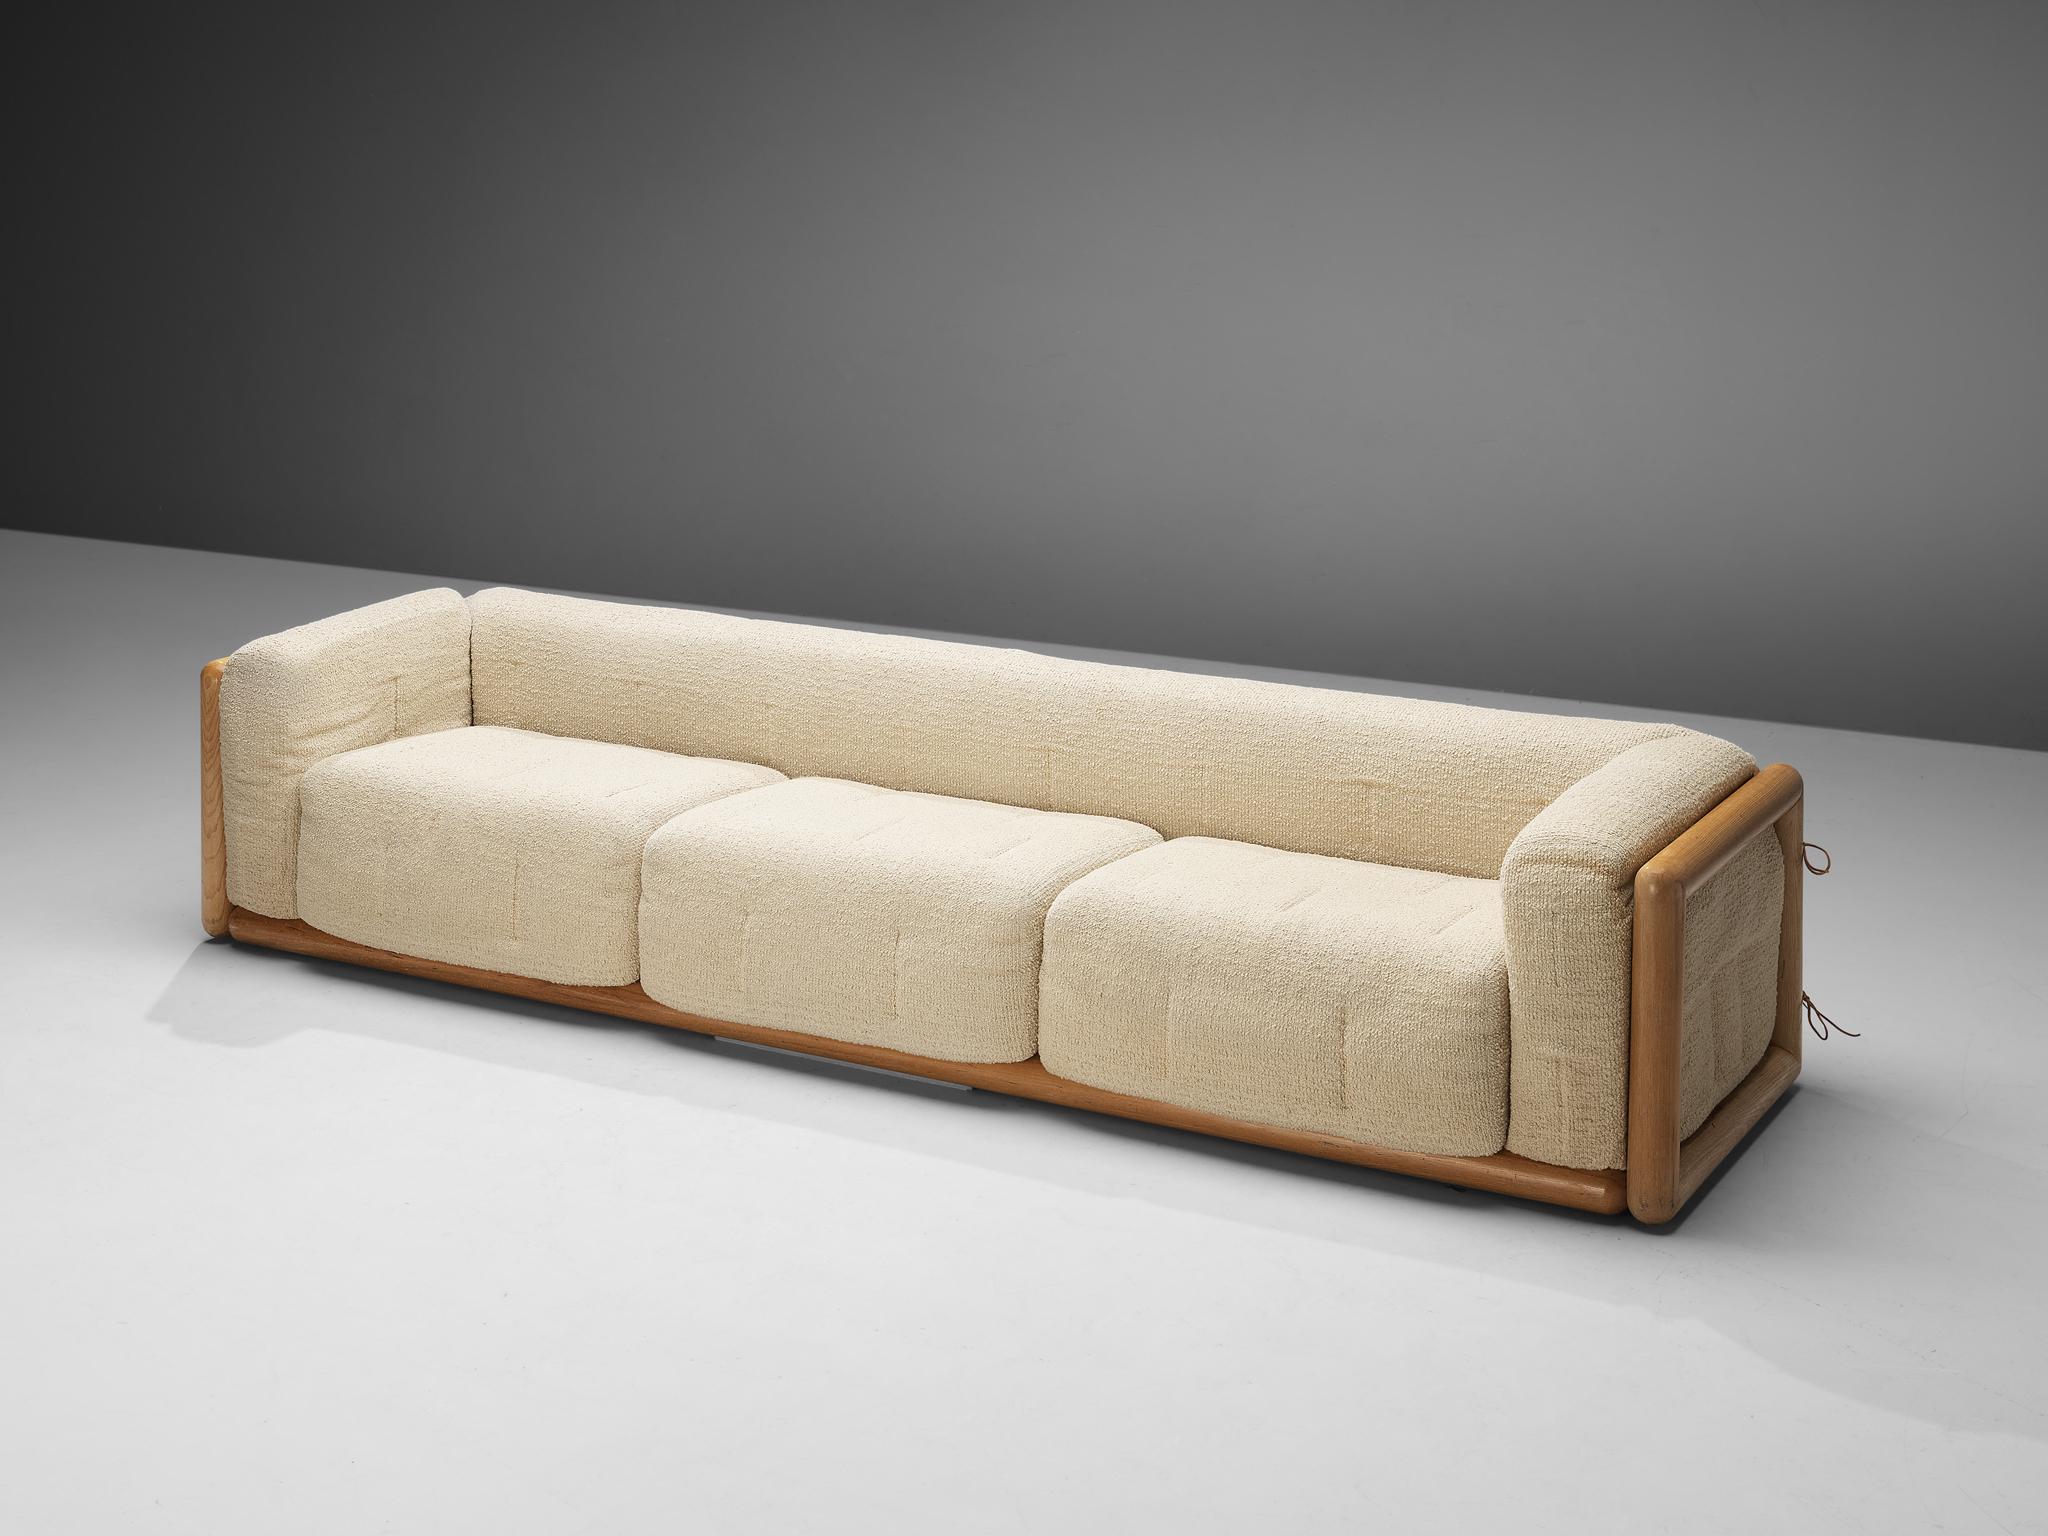 Carlo Scarpa for Simon Collezione, 'Cornaro' sofa, off-white fabric, ash, Italy, 1973

The 'Cornaro' sofa by Carlo Scarpa is a perfect example of the Ultrarazionale style; breaking away from the strict limits of Rationalism, resulting in a sofa with